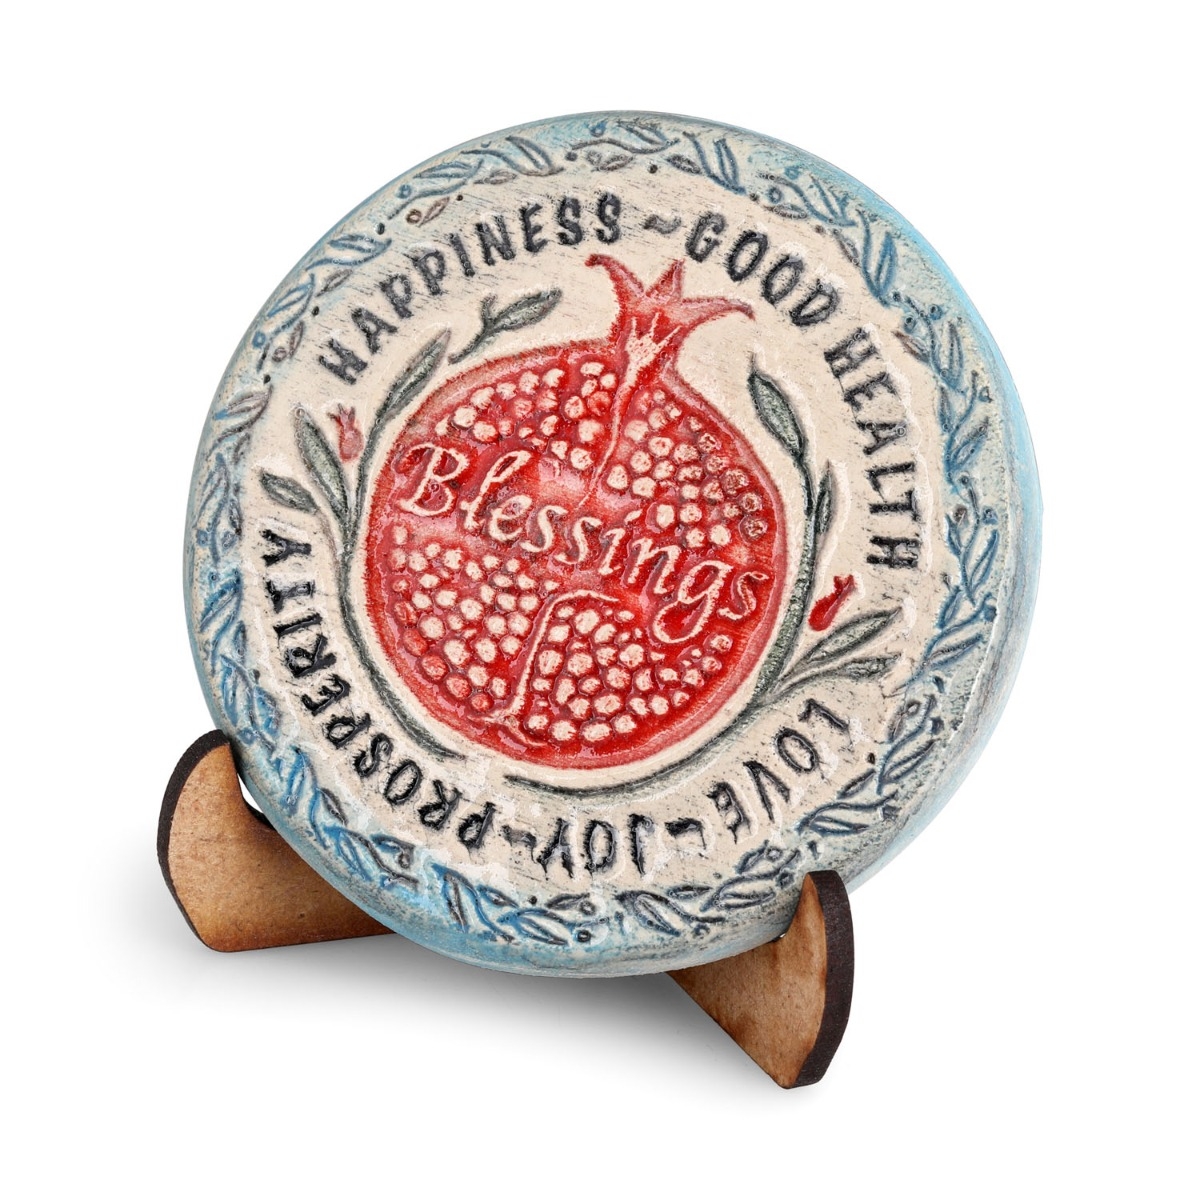 Art In Clay Limited Edition Pomegranate and Blessings Round Ceramic Seal Desk Ornament Wall Hanging - 1